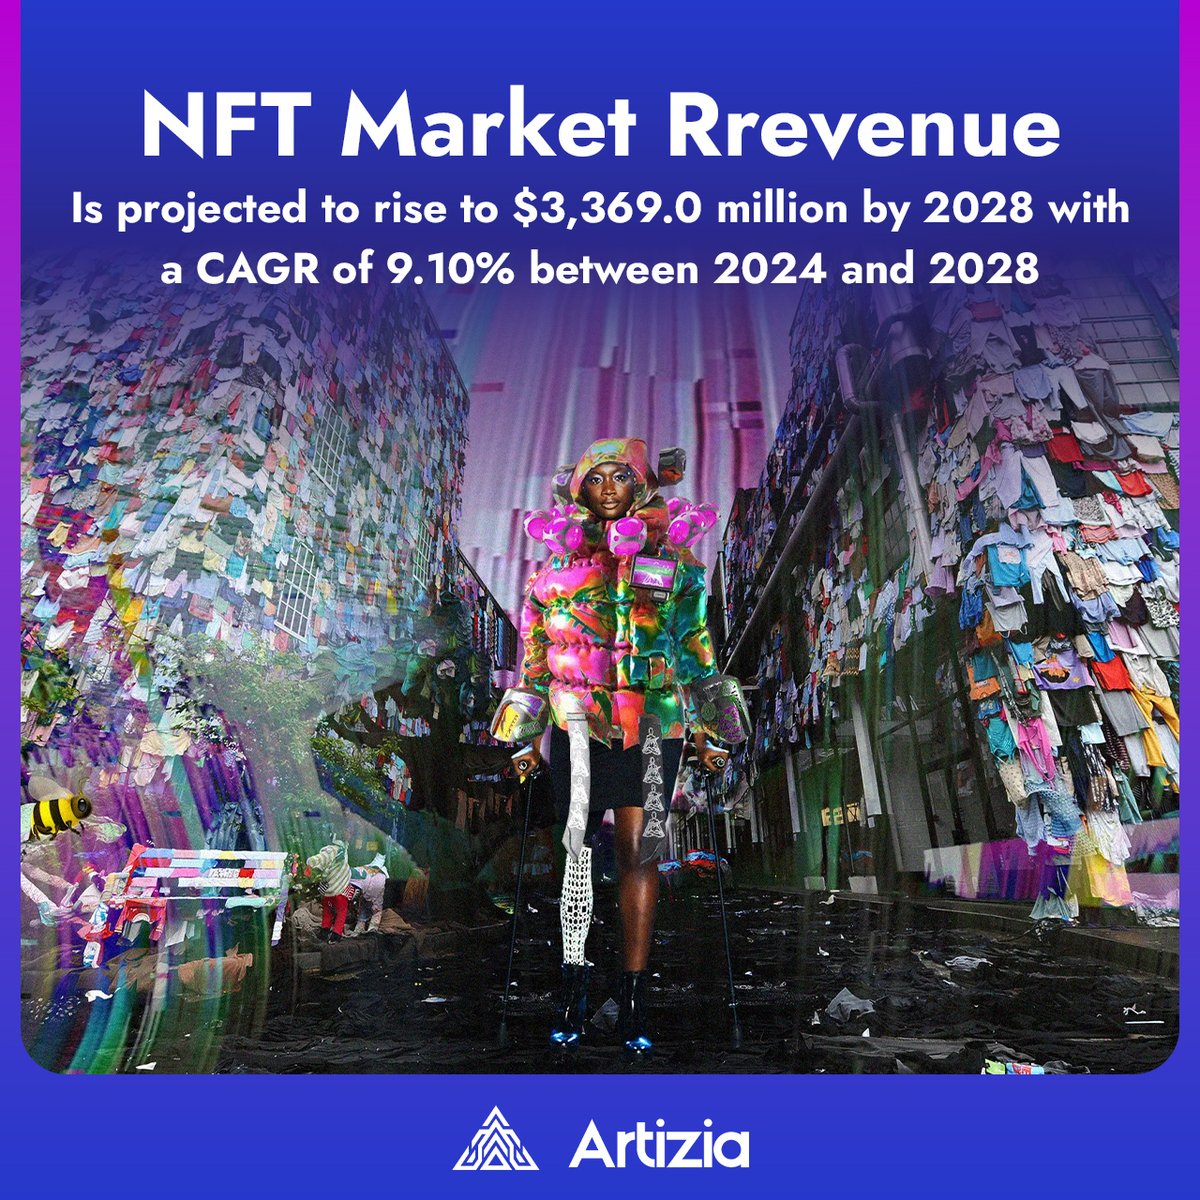 NFTs are on the rise! 🚀 By 2028, expect a $3.4B market with a 9.10% growth rate. Art and tech unite in an exciting digital era. 💹
.
.
.
#NFTBoom #CryptoArt #DigitalFuture #Artizia #BlockchainInnovation #InvestmentTrend #MarketGrowth #TechTrends2028 #NFTStats #DigitalArtEconomy